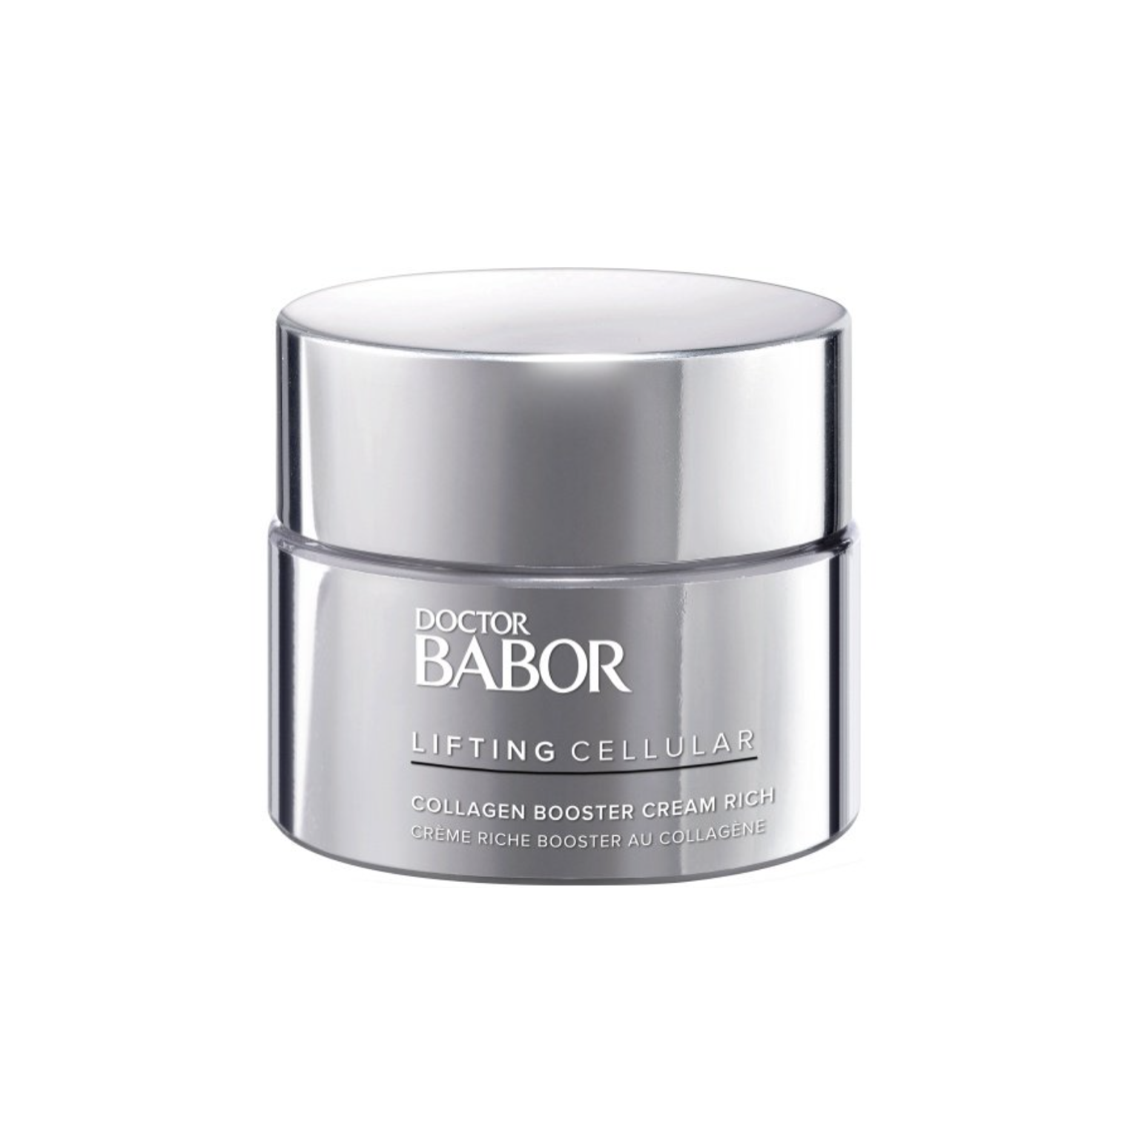 Doctor Babor Lifting Cellular, Collagen Booster Cream Rich